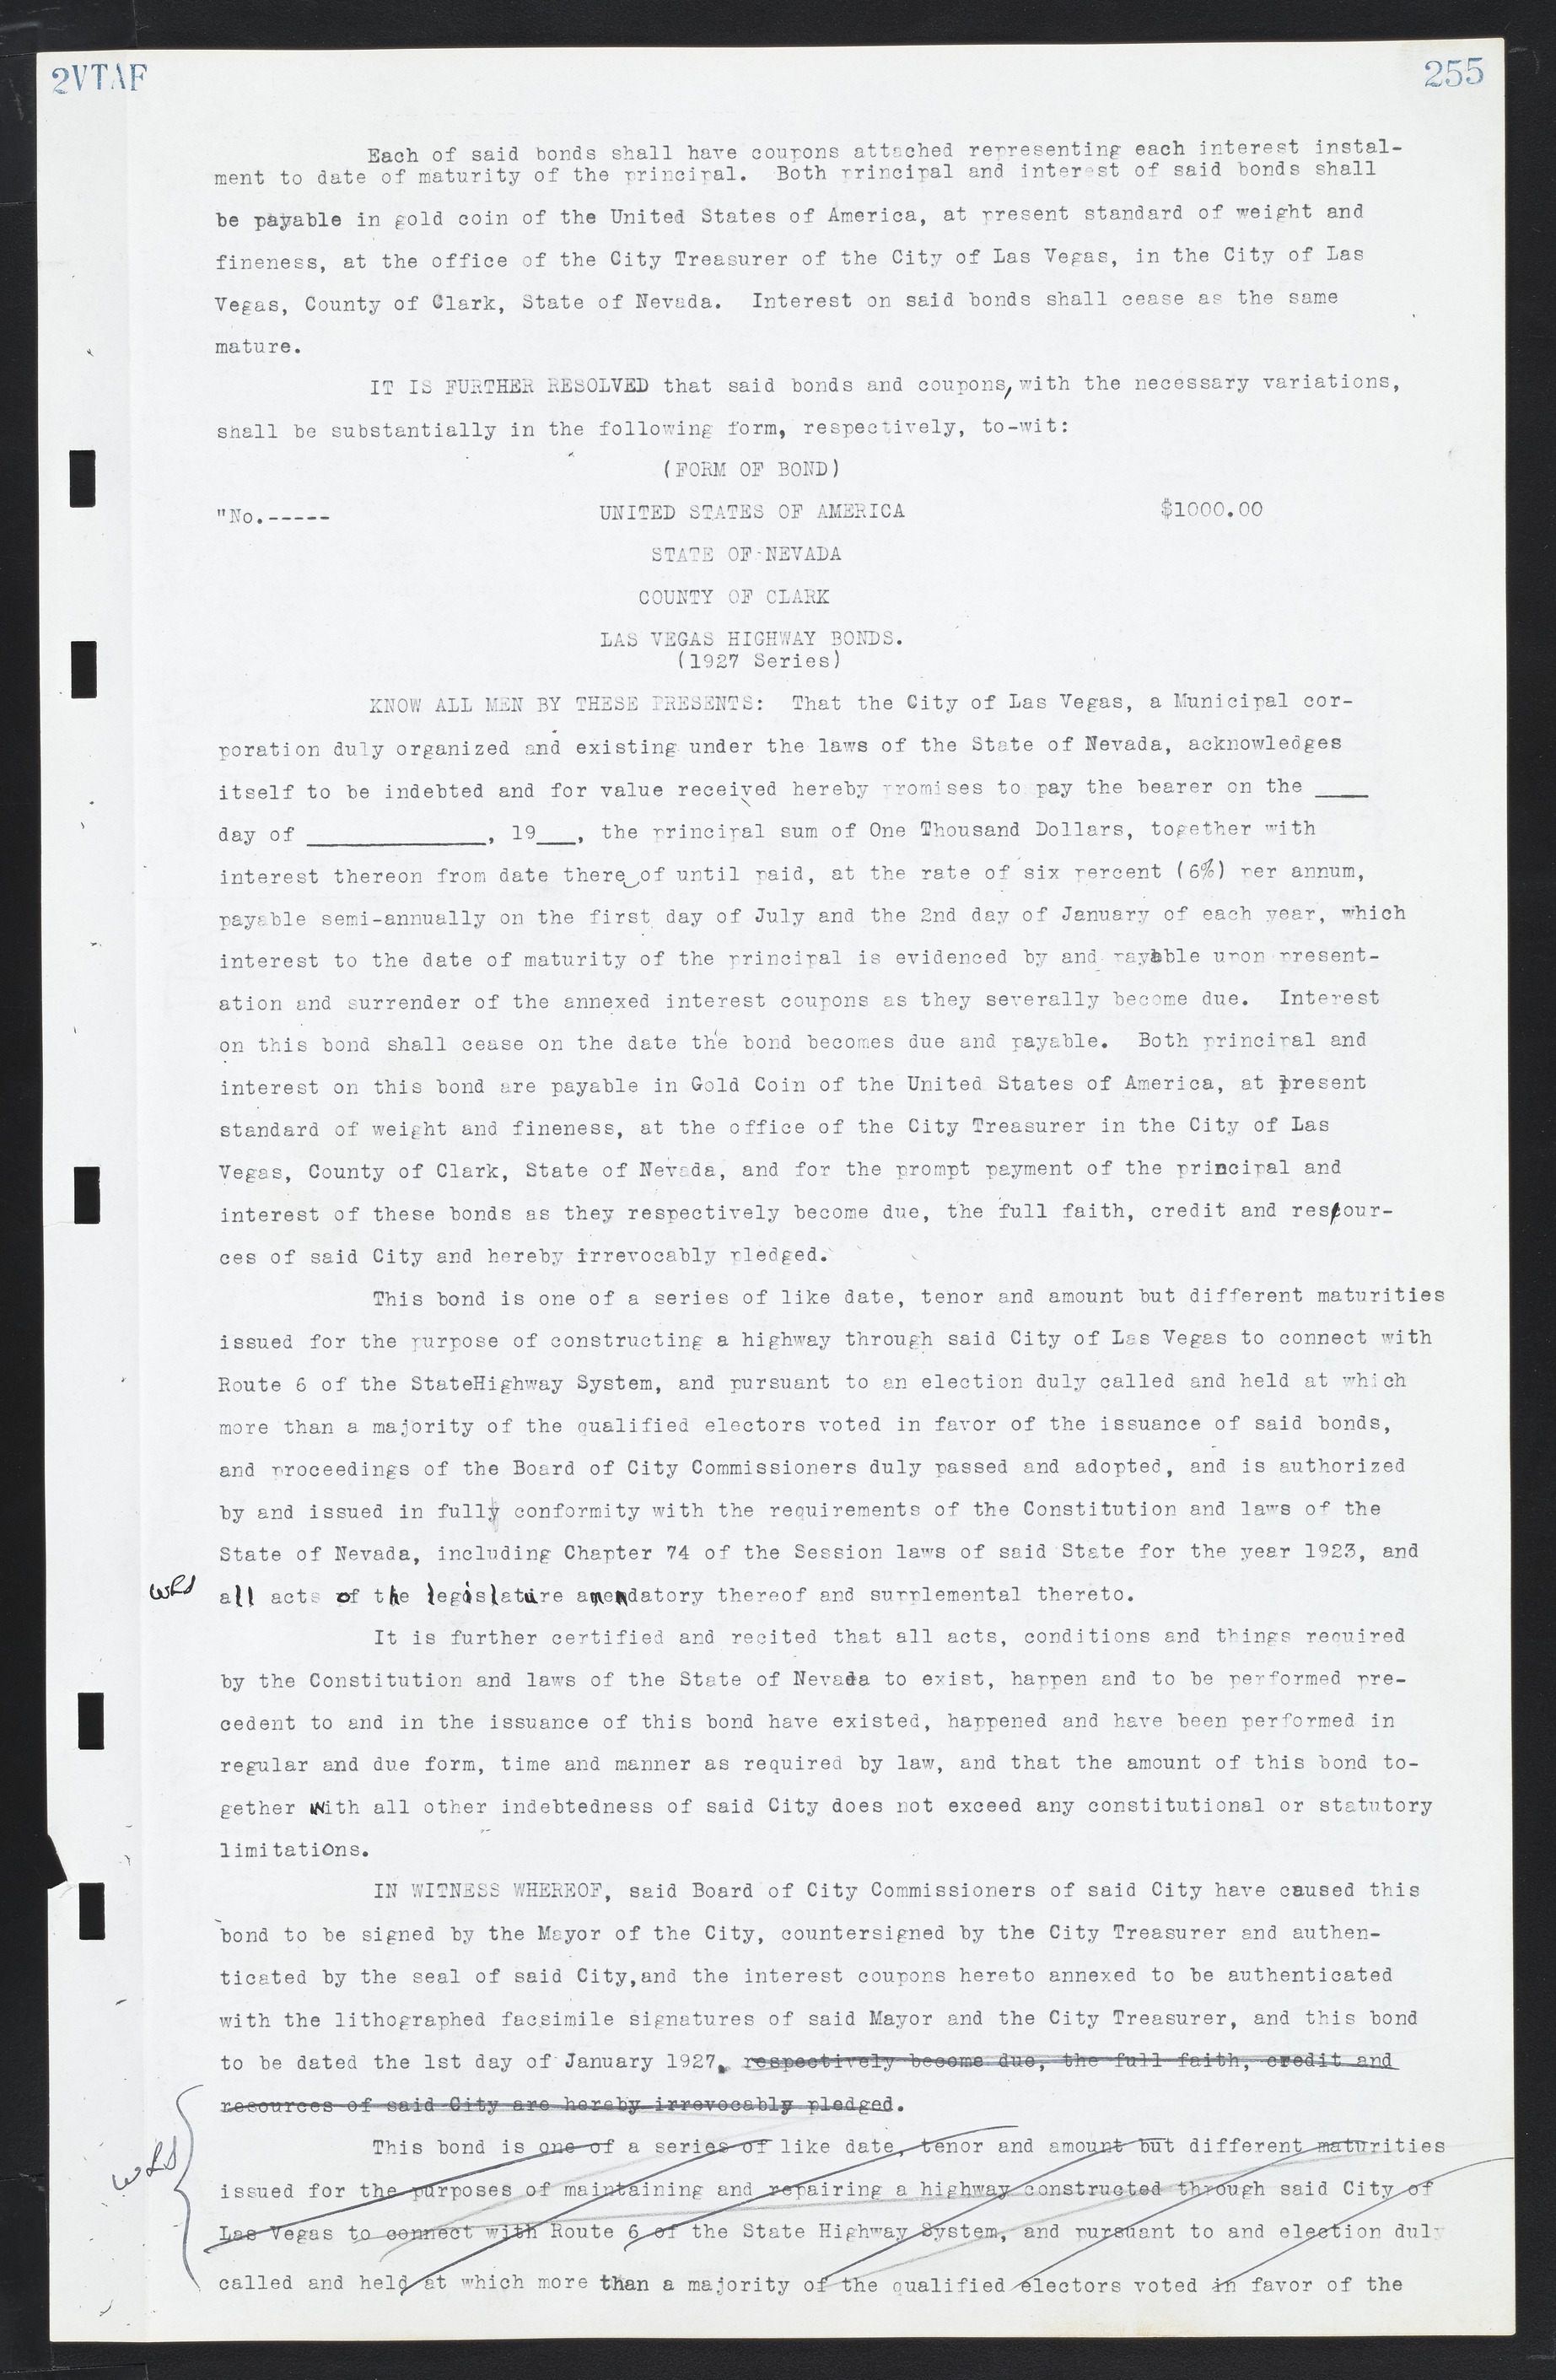 Las Vegas City Commission Minutes, March 1, 1922 to May 10, 1929, lvc000002-264